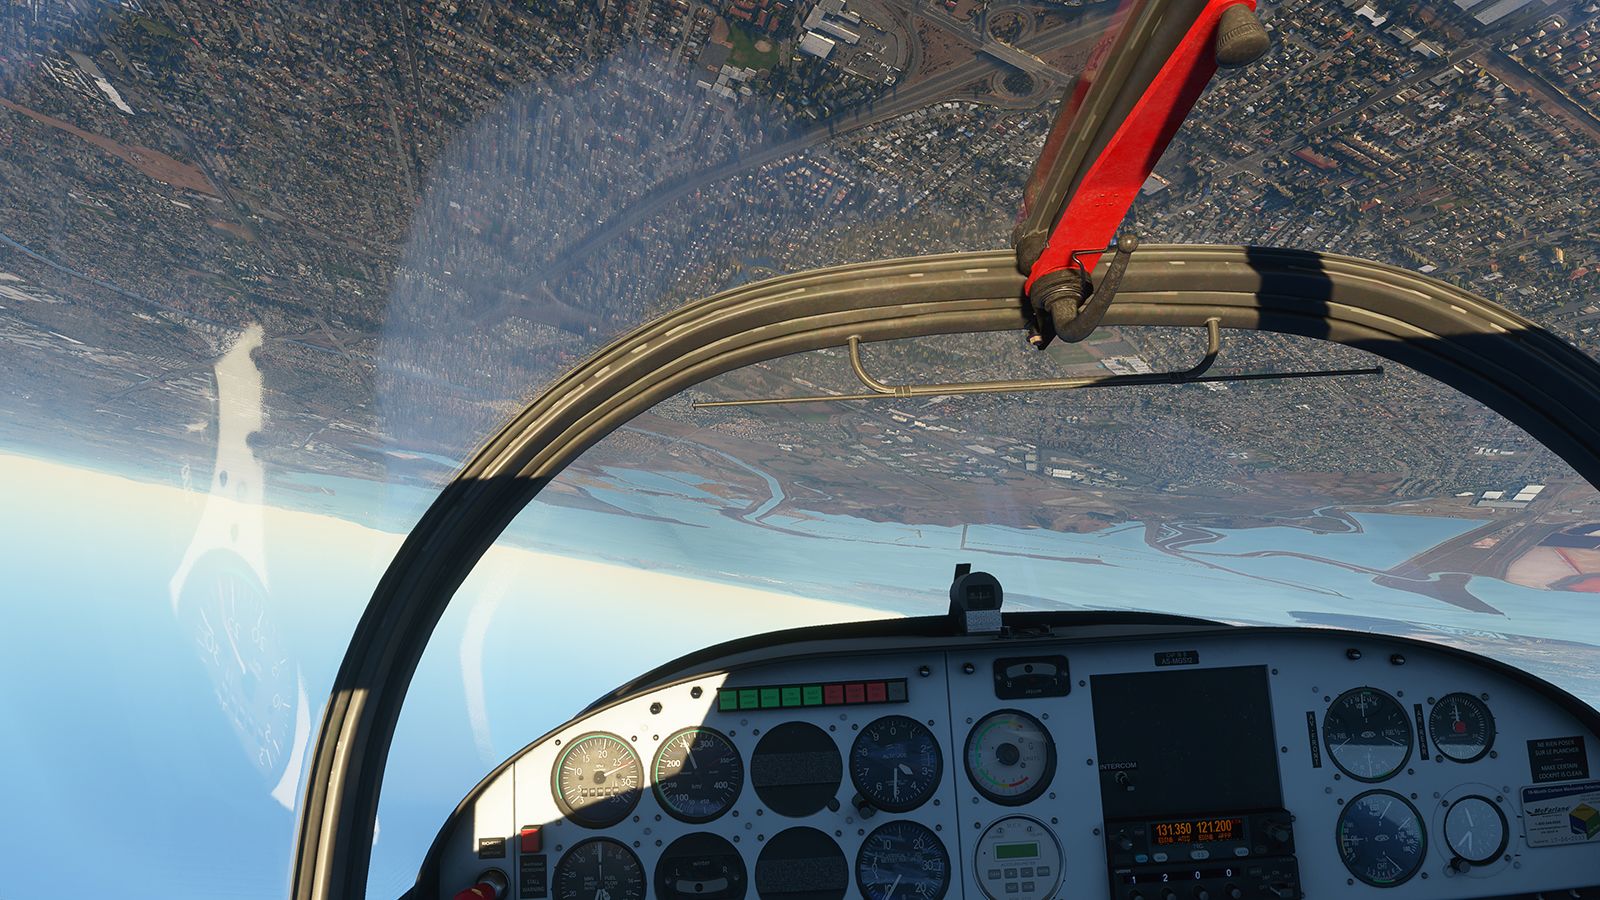 10 amazing things we've learned about Microsoft Flight Simulator